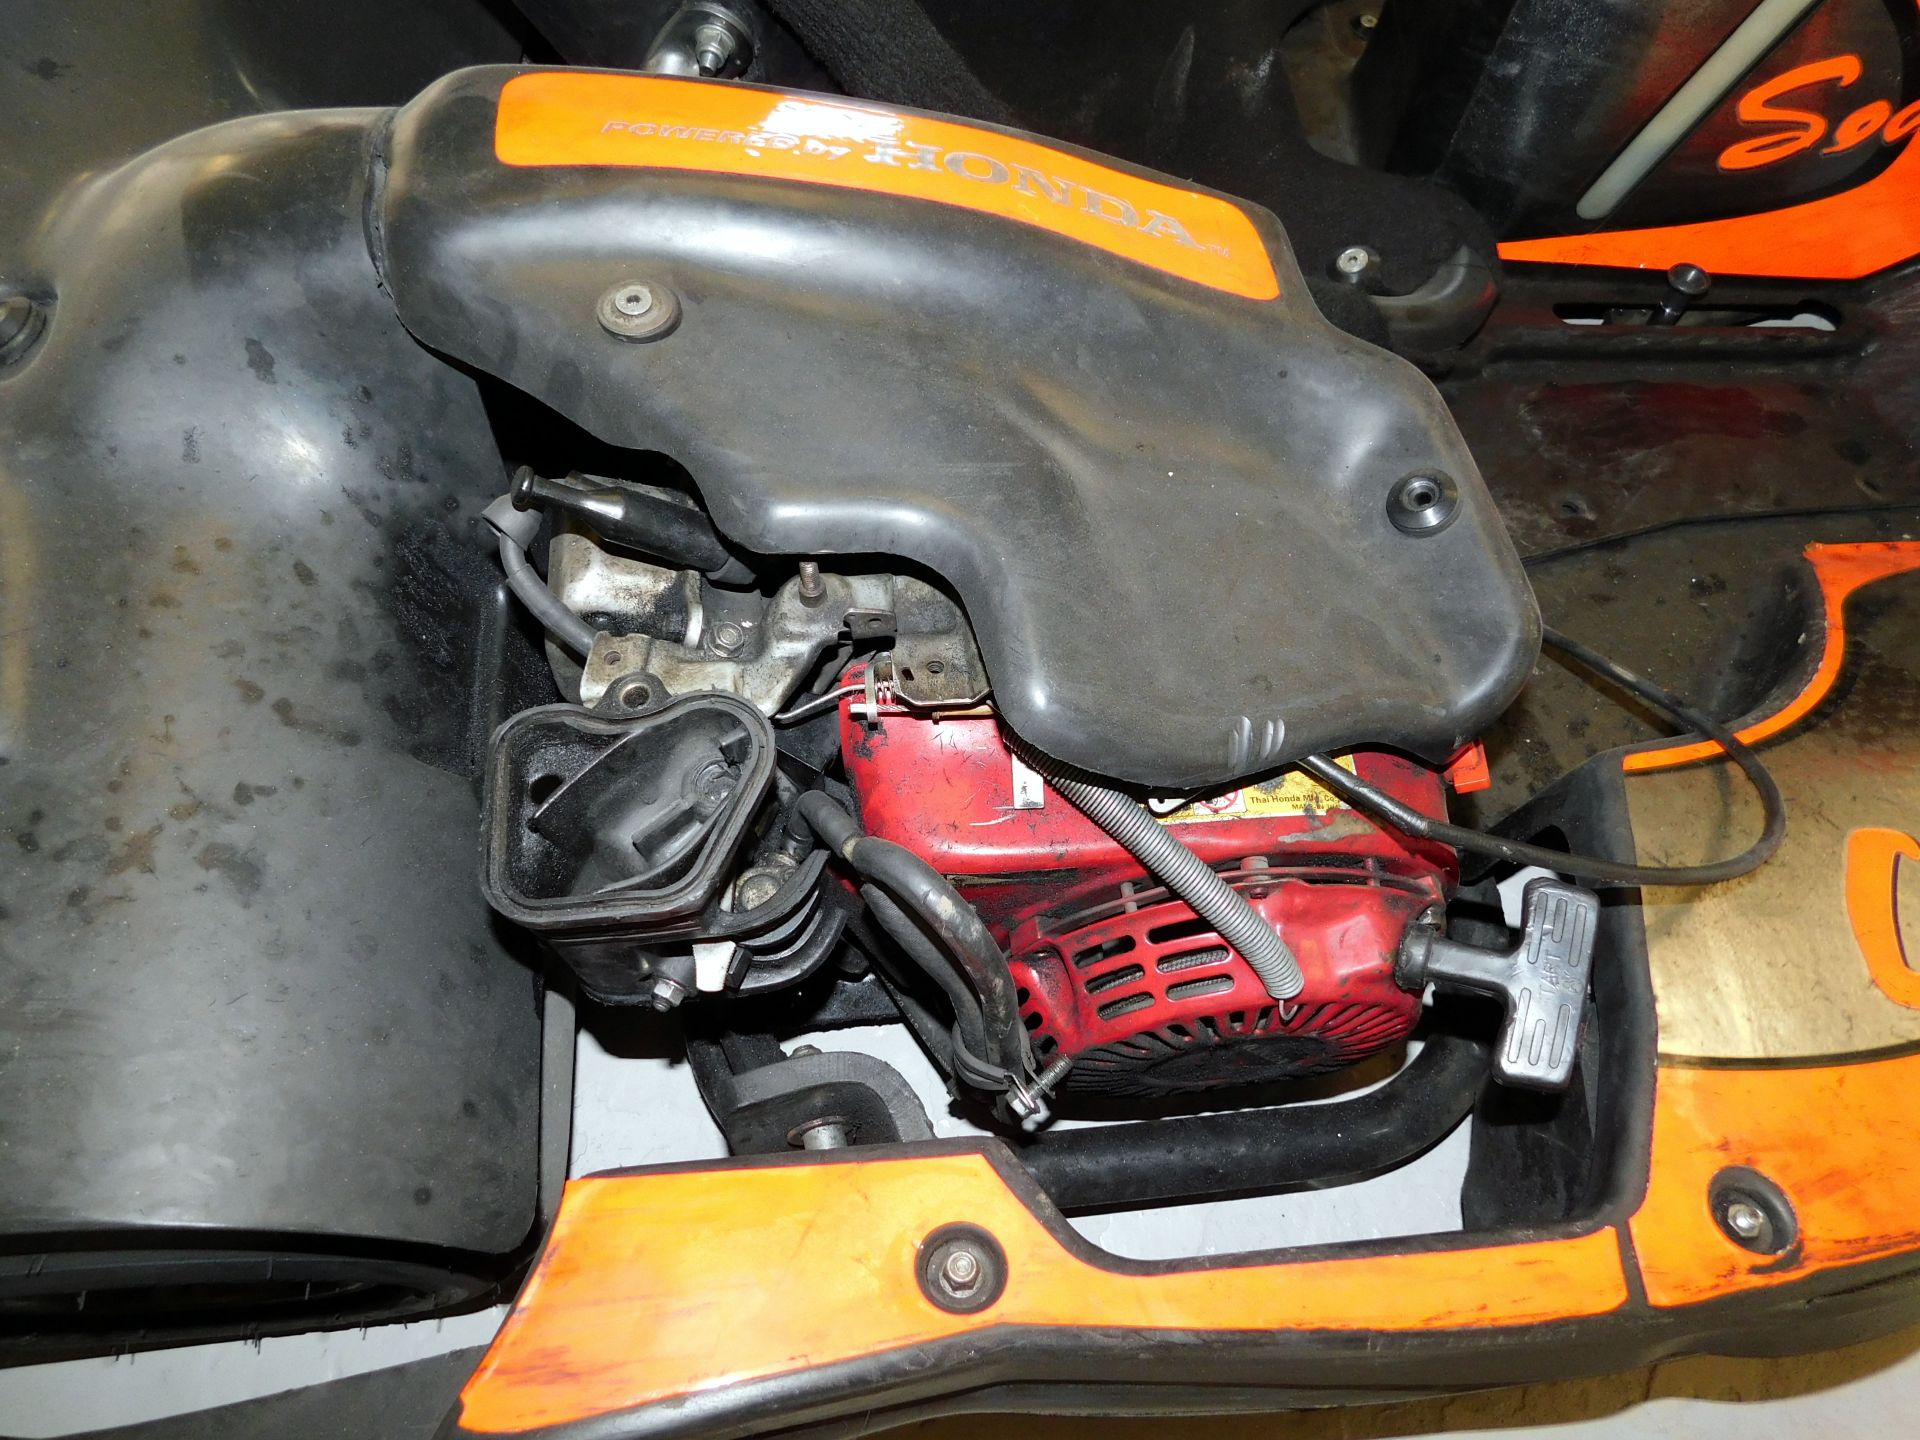 Sodi RX7 Petrol Powered Go-Kart with Honda GX200 Engine (located in Bredbury, collection Friday 20th - Image 5 of 5